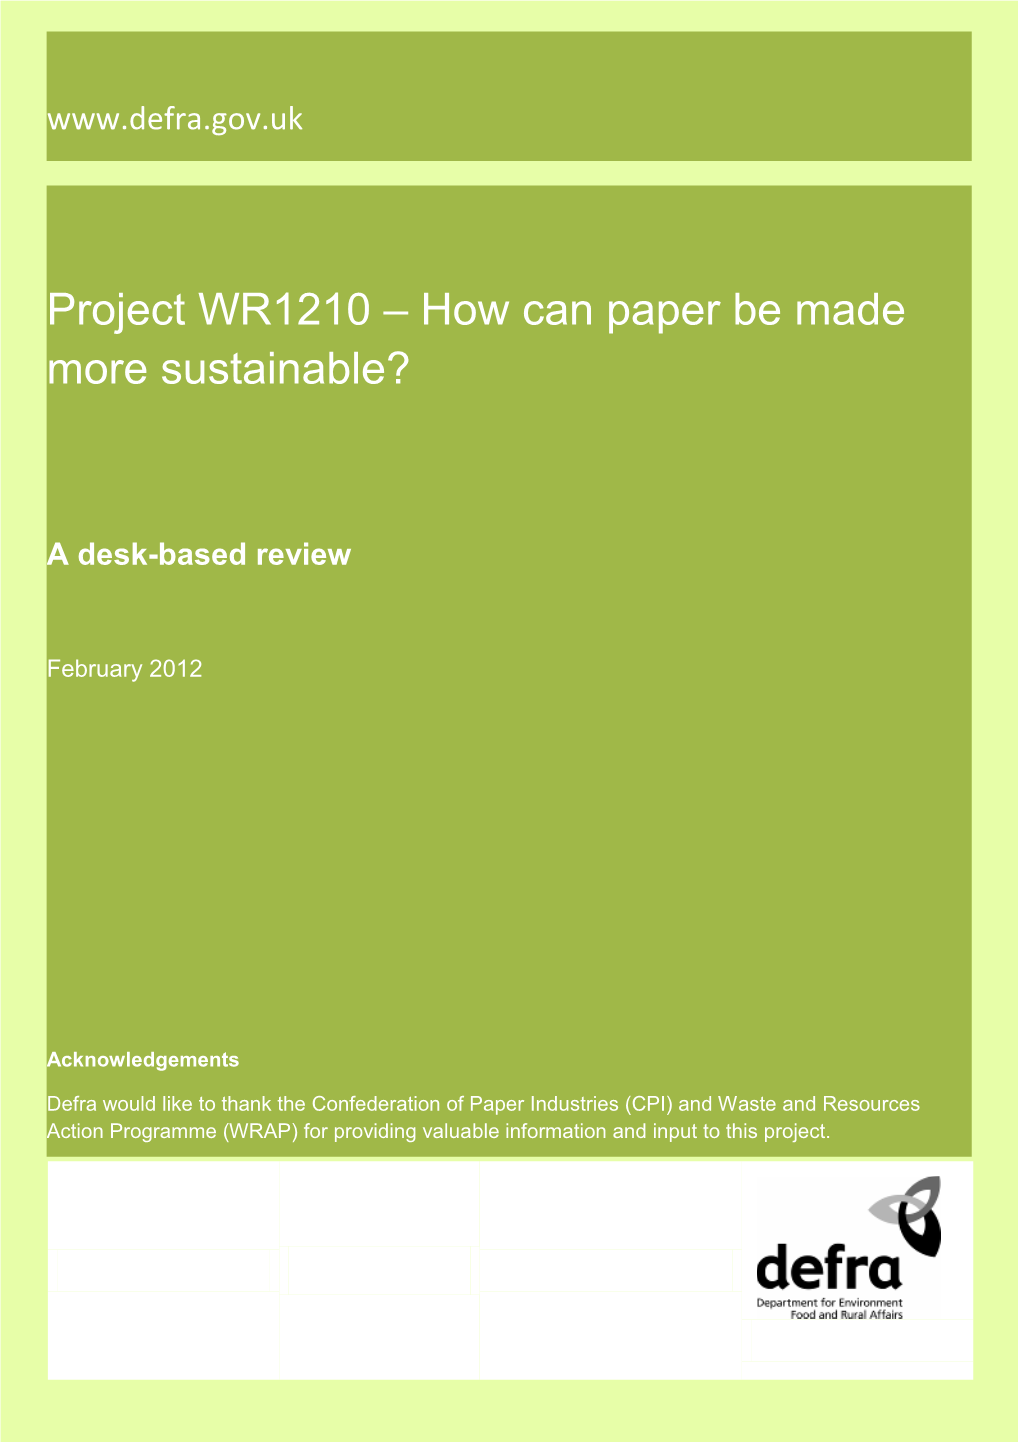 WR1210 Sustainable Paper